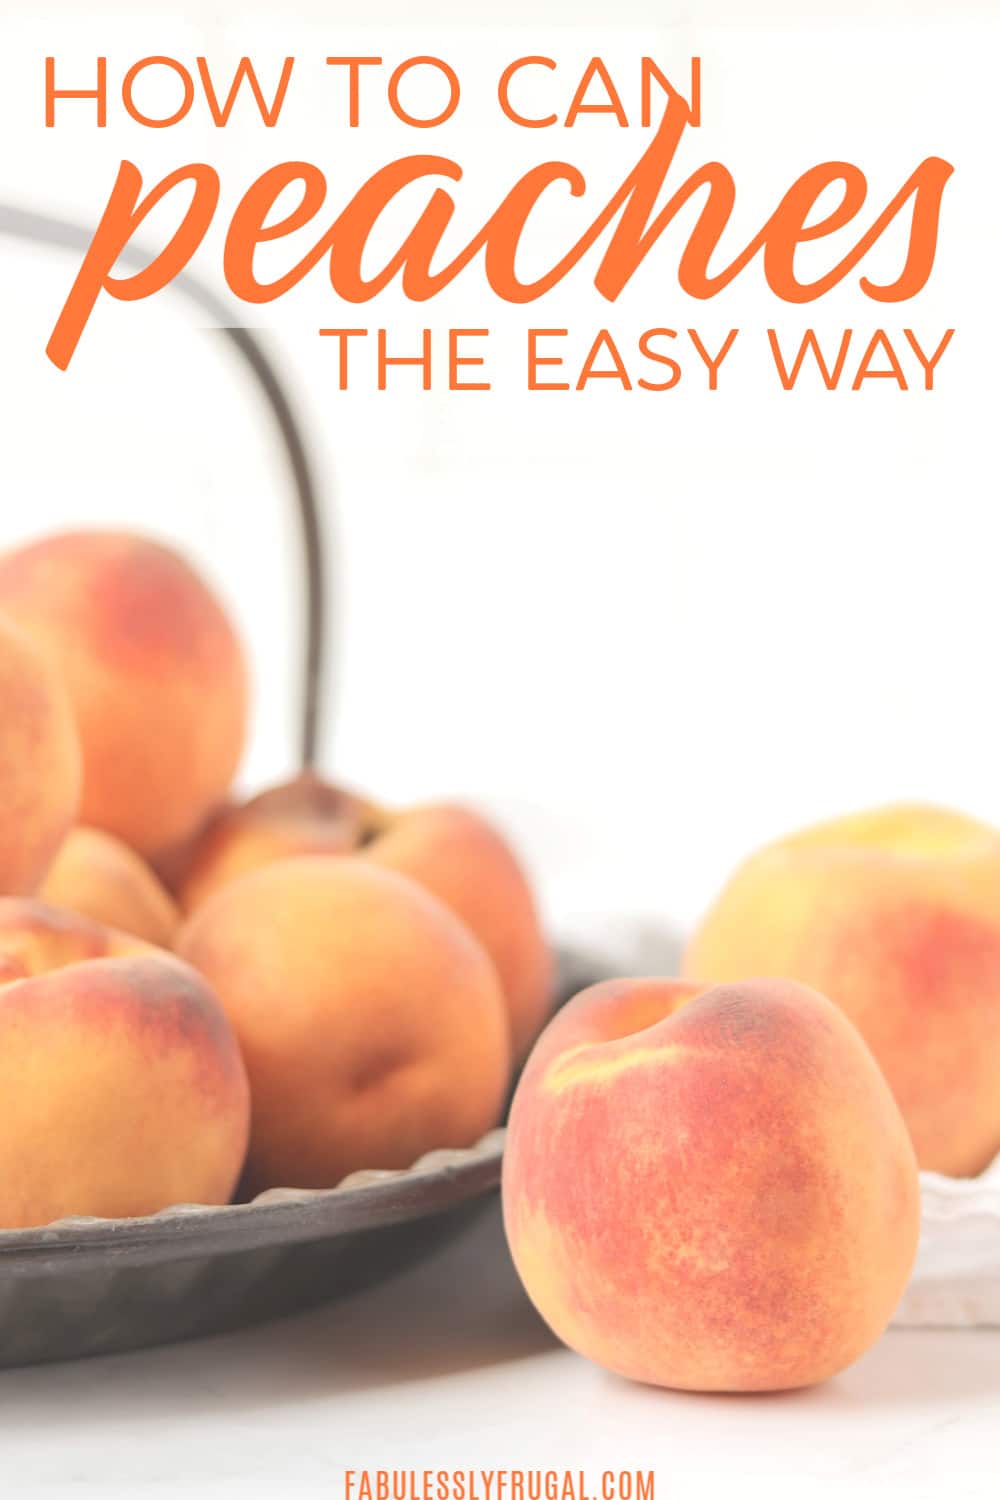 How to can peaches the easy way